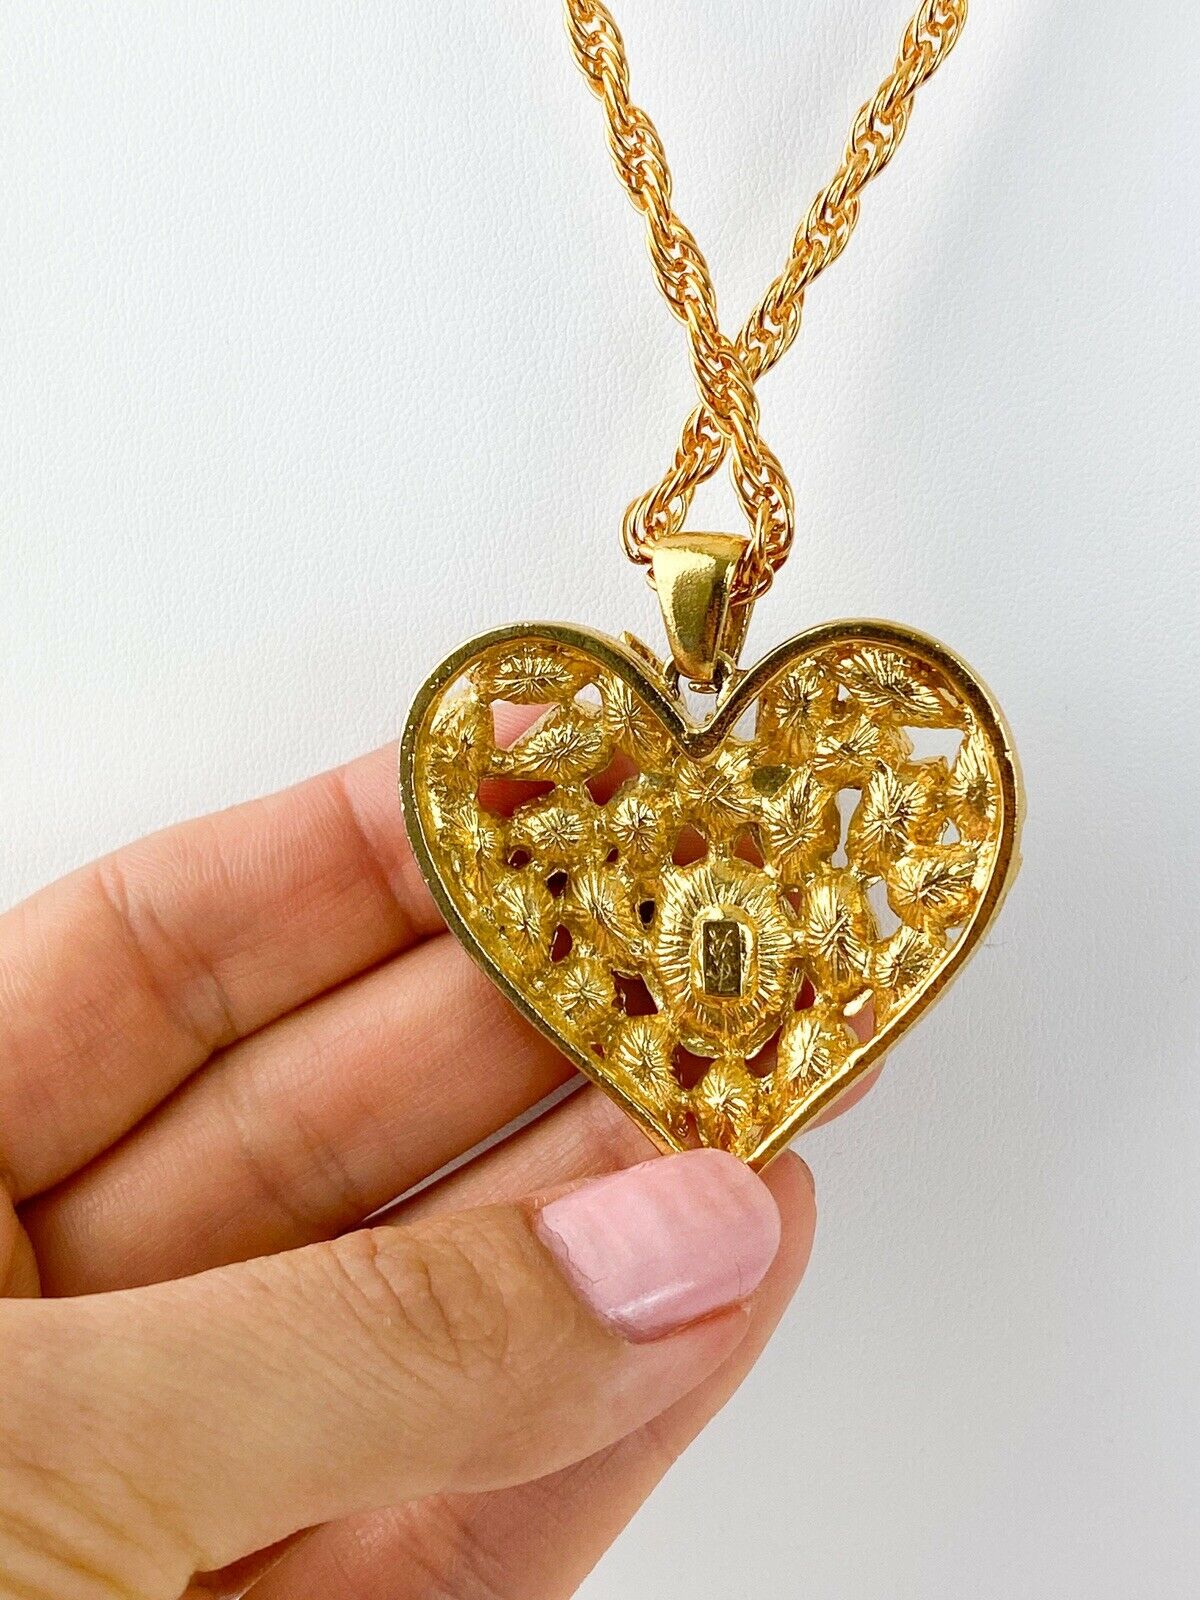 【SOLD OUT】YSL Yves Saint Laurent Vintage Gold Tone Heart Necklace Rhinestone